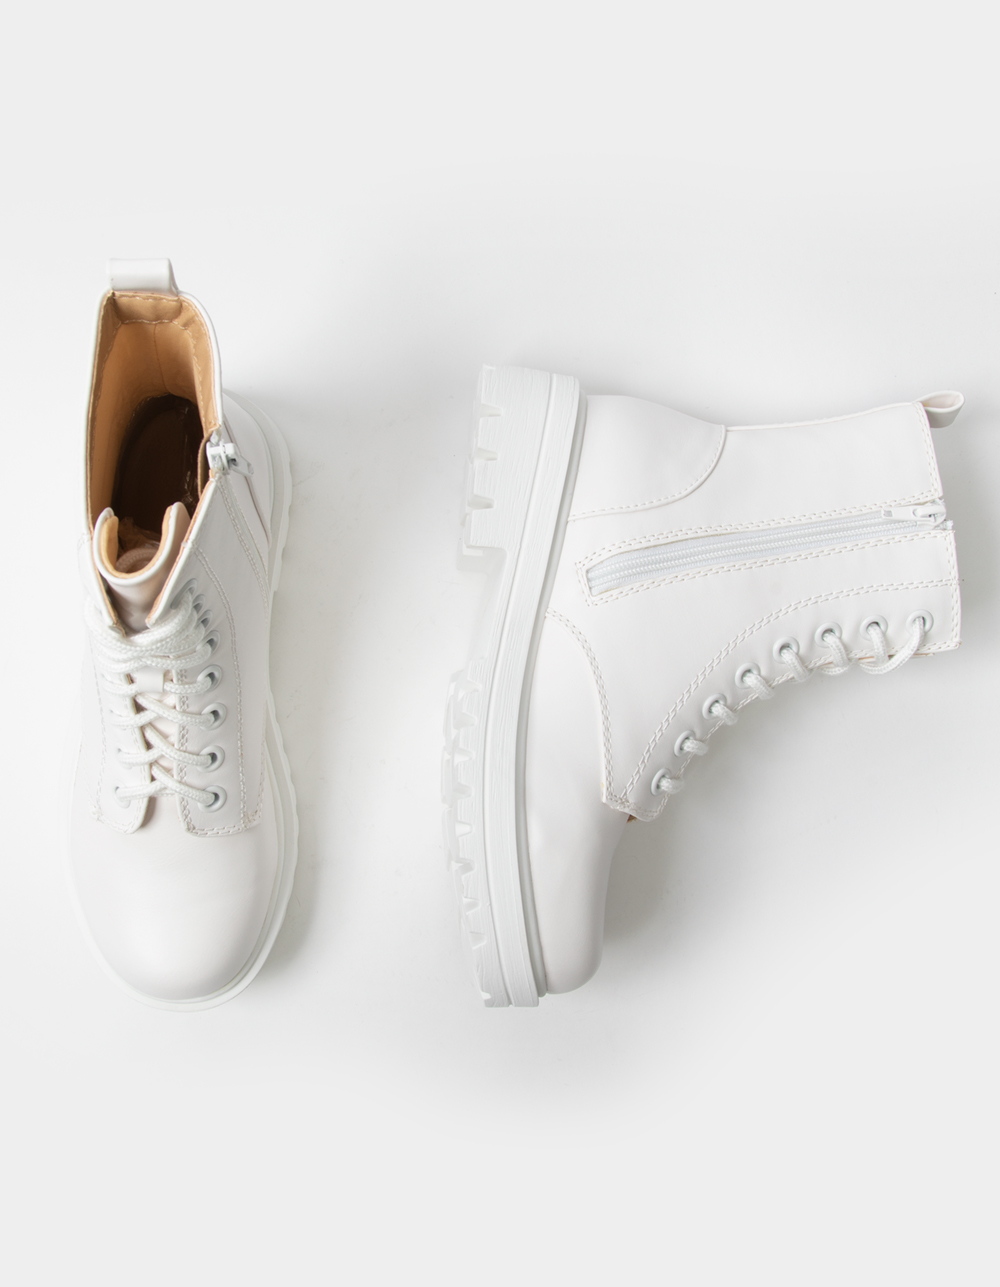 SODA Lug Sole Womens Combat Boots - WHITE | Tillys